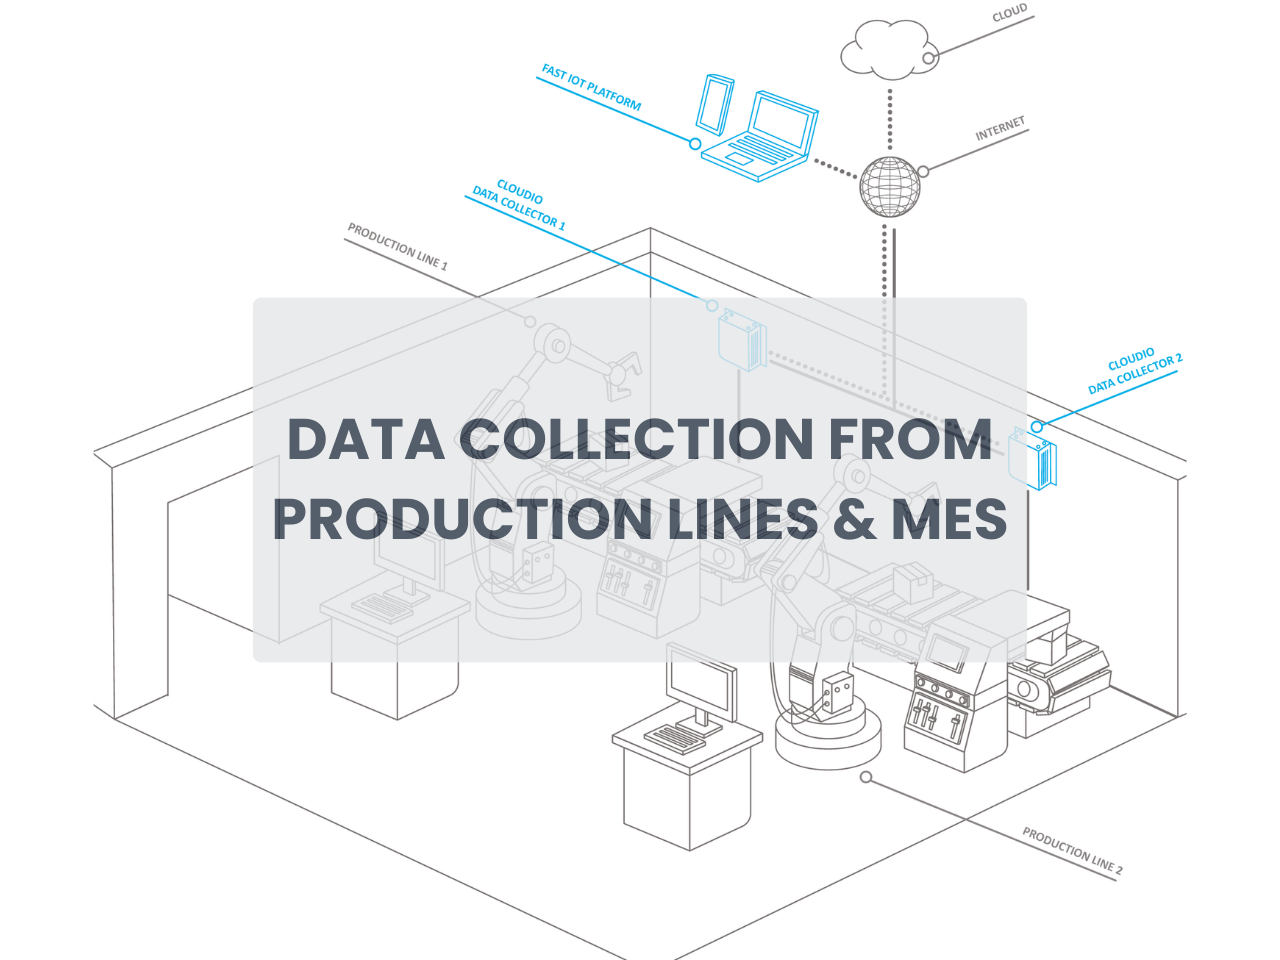 DATA COLLECTION FROM PRODUCTION LINES & MES